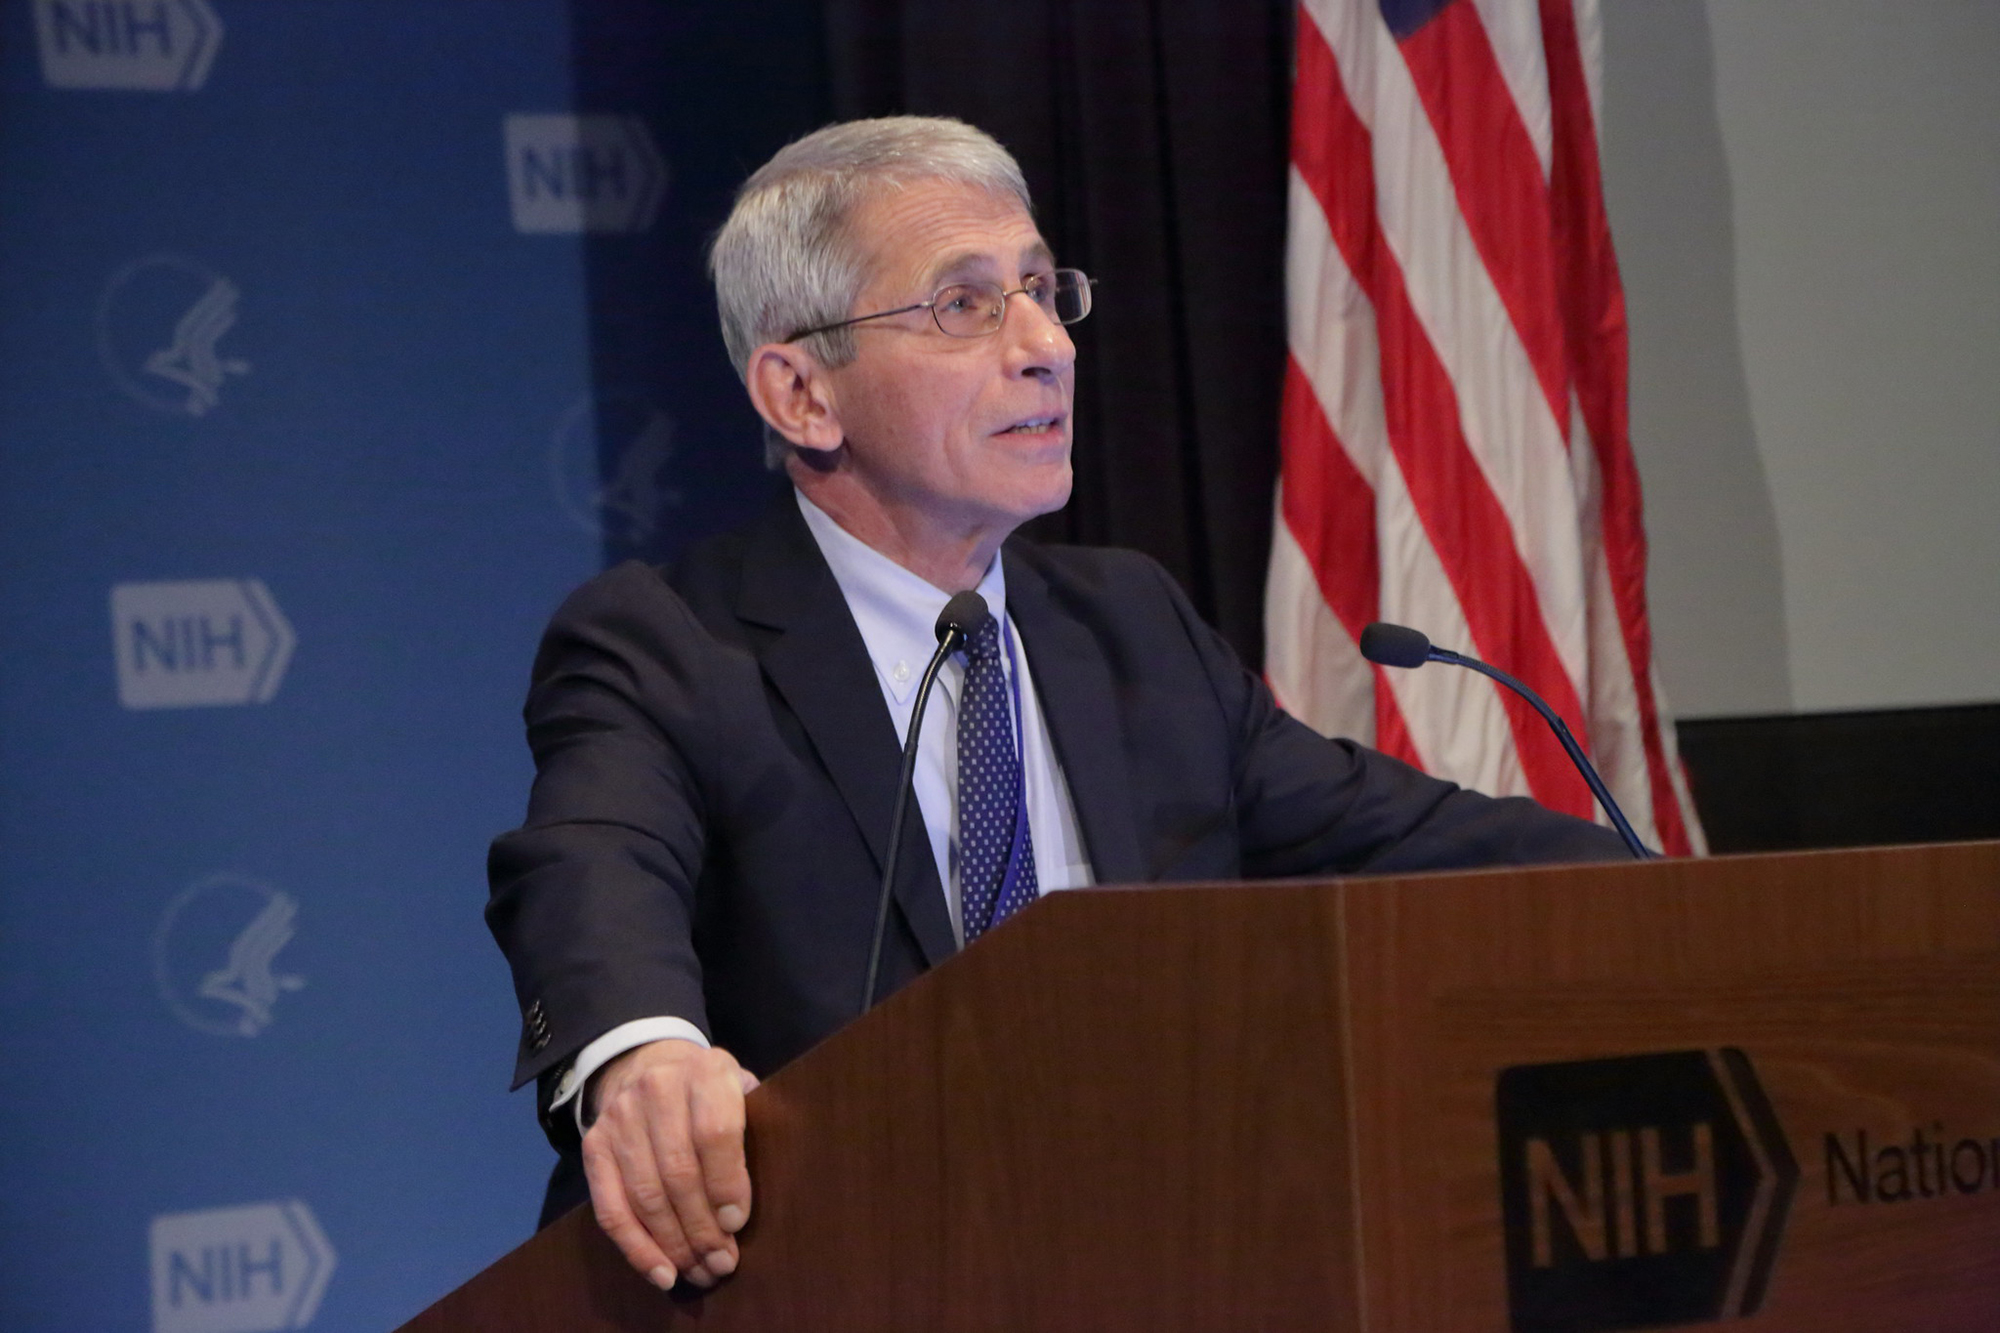 Anthony Fauci speaking at a podium with an American flag in the background.